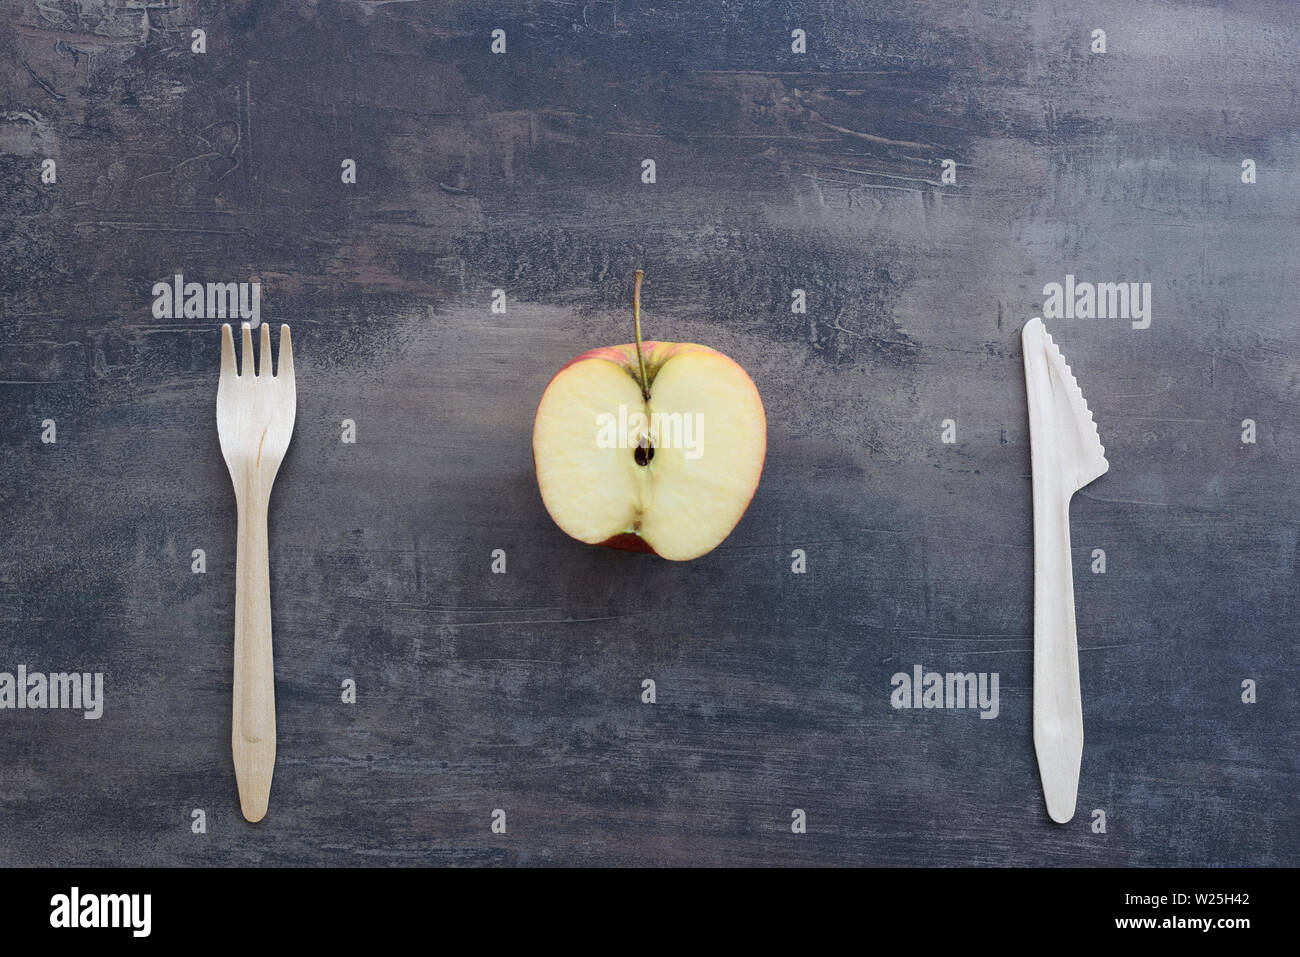 Top view of fork, knife and apple cut in half, on background of marble kitchen counter. Natural wooden cutlery. Stock Photo